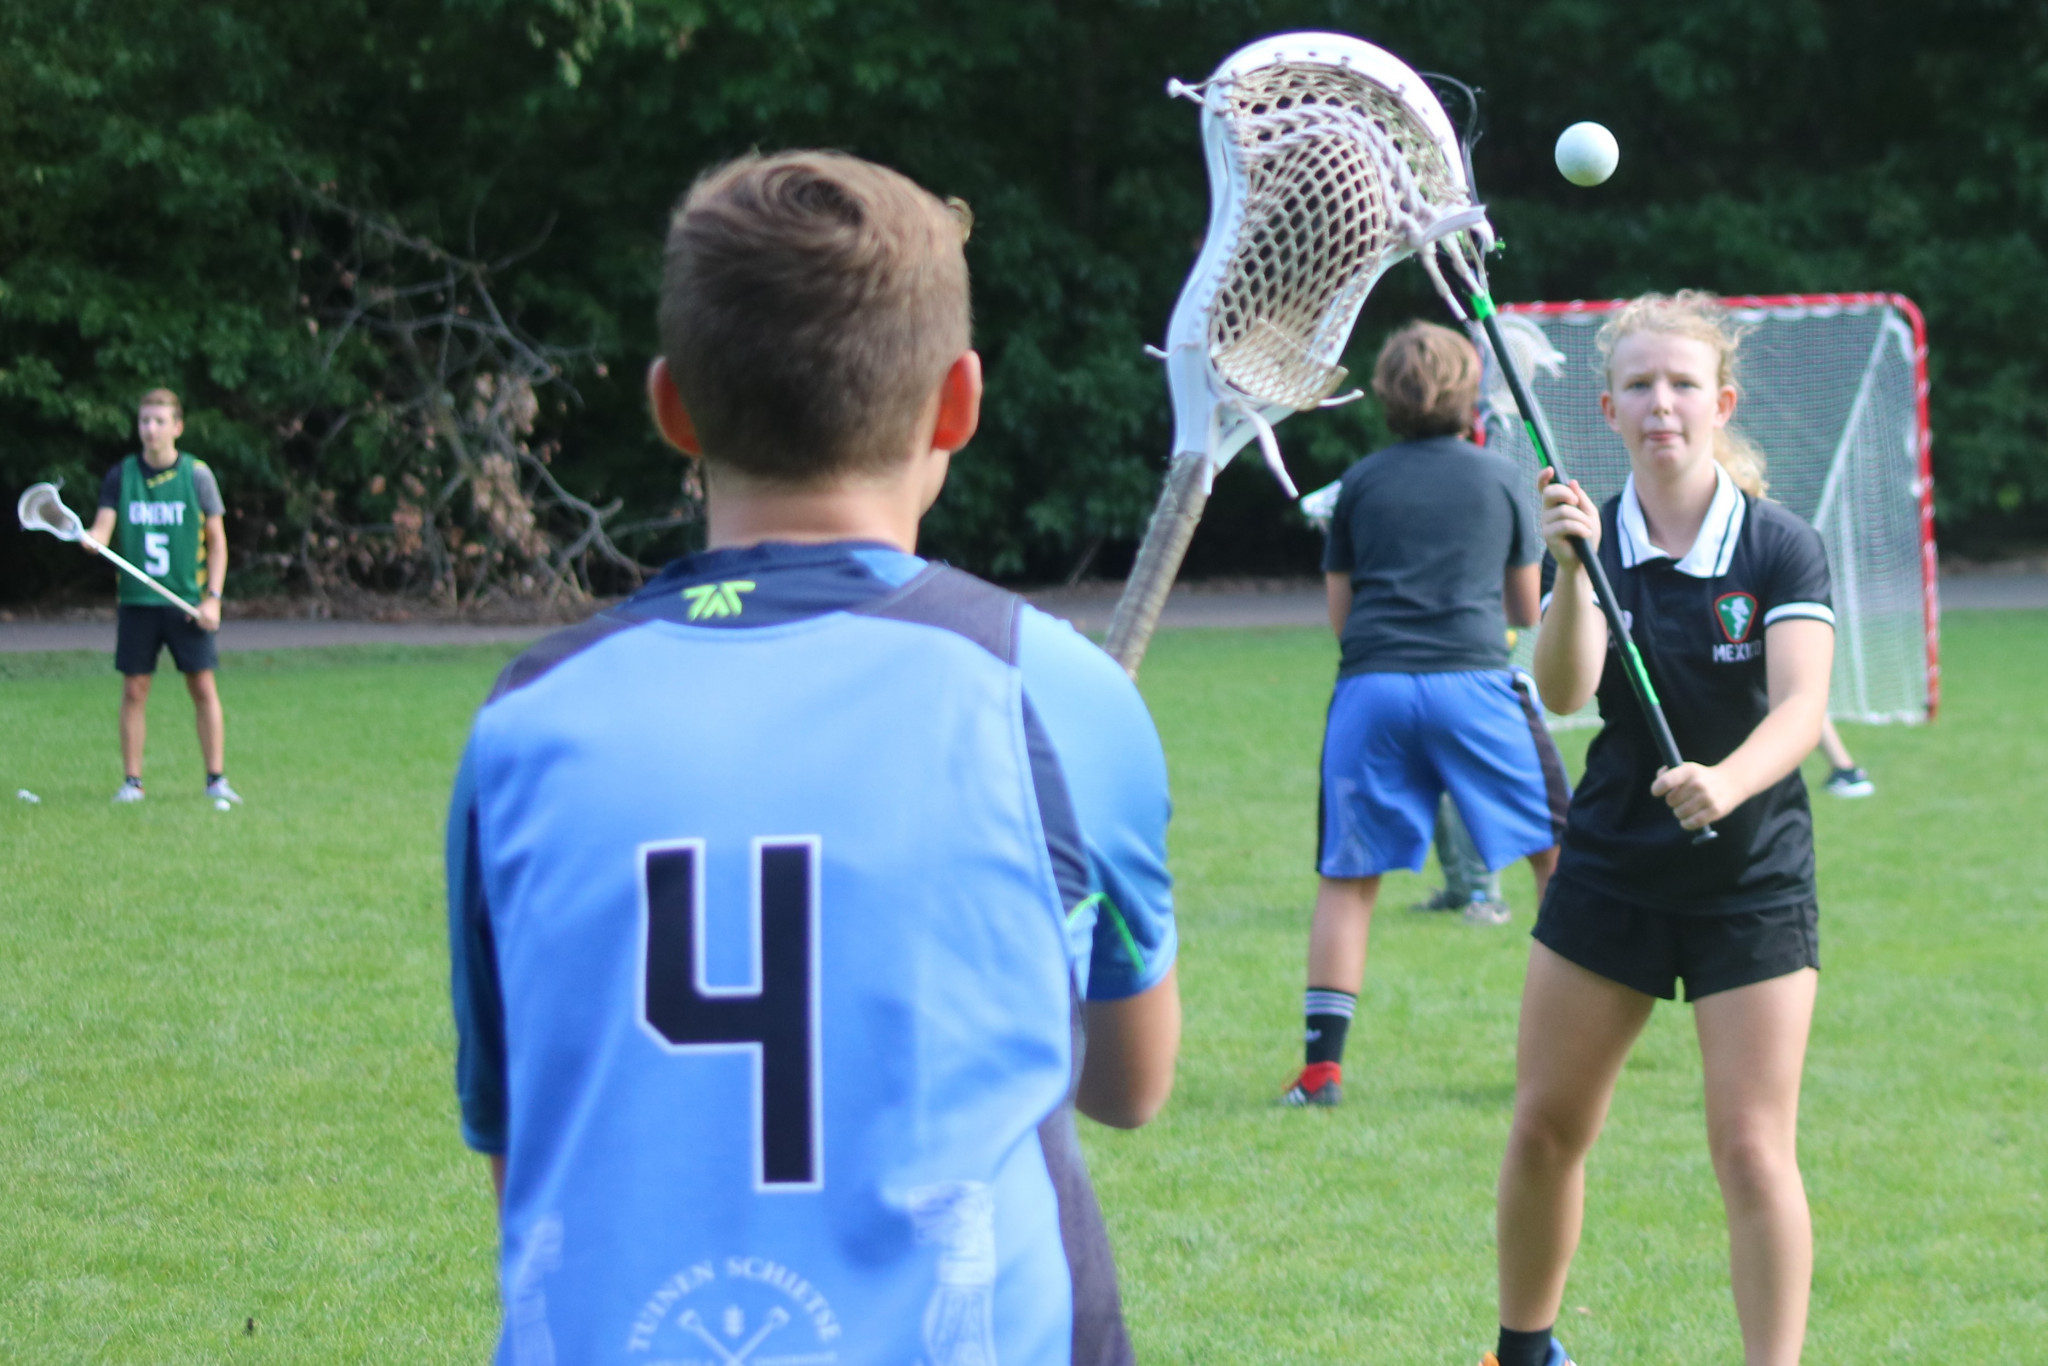 World Lacrosse gives 15 members COVID-19 relief grants